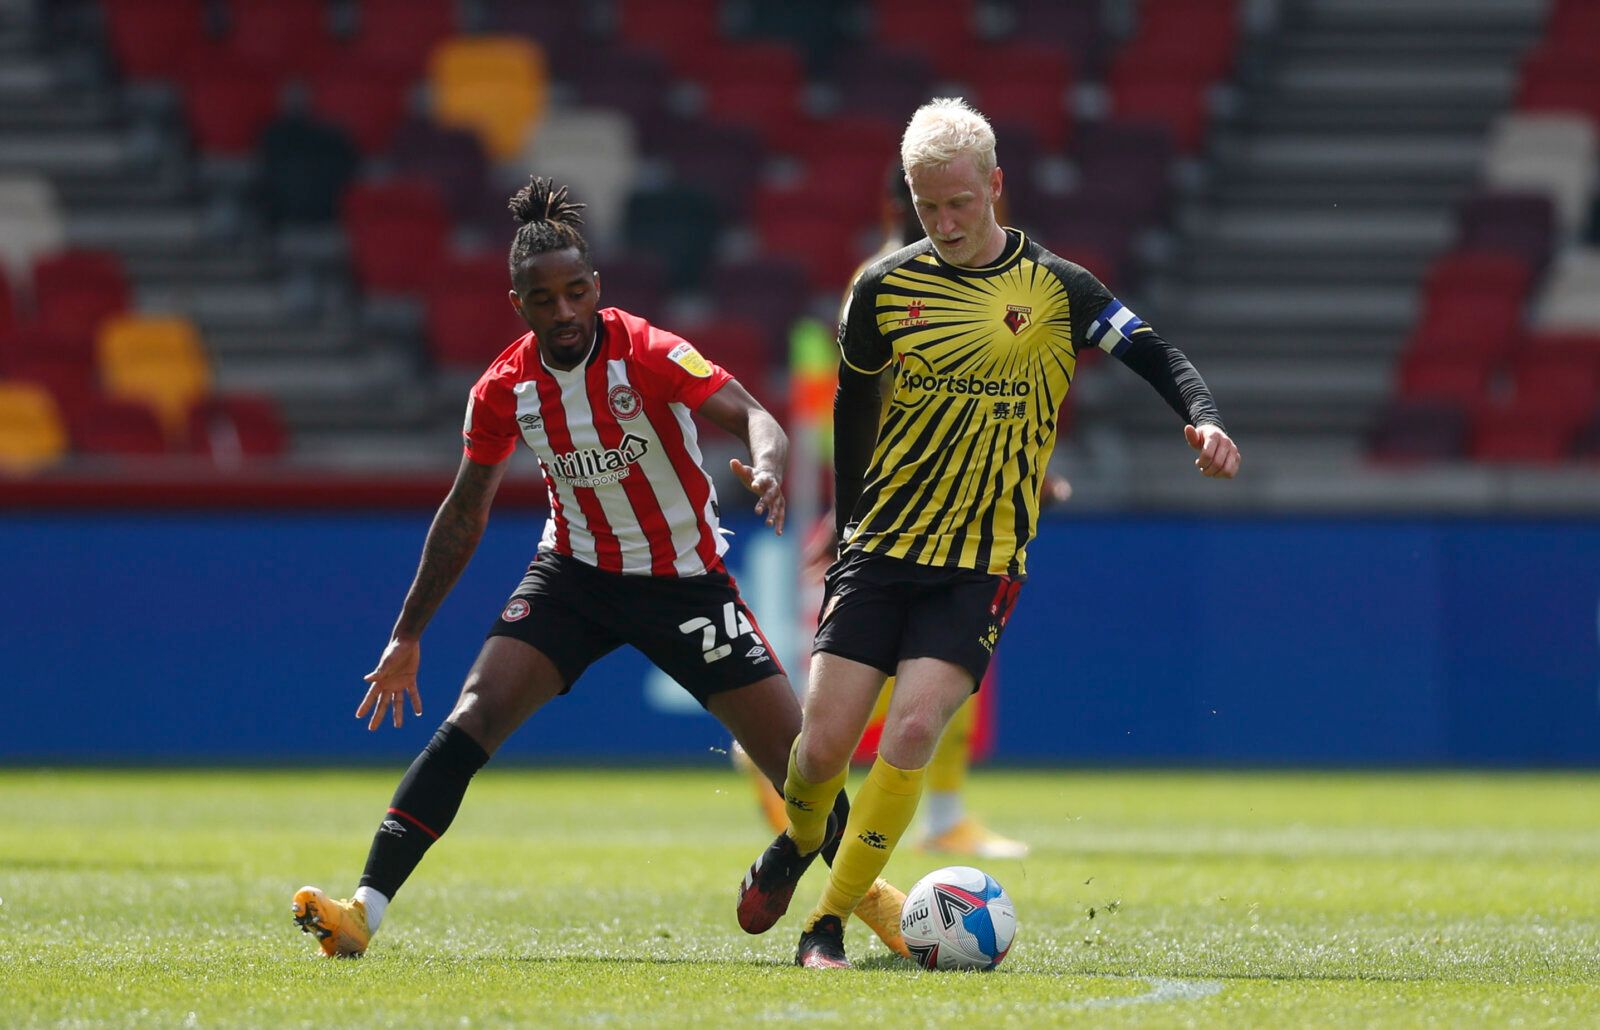 Soccer Football - Championship - Brentford v Watford - Brentford Community Stadium, London, Britain - May 1, 2021 Brentford's Tariqe Fosu in action with Watford's Will Hughes Action Images/Matthew Childs EDITORIAL USE ONLY. No use with unauthorized audio, video, data, fixture lists, club/league logos or 'live' services. Online in-match use limited to 75 images, no video emulation. No use in betting, games or single club /league/player publications.  Please contact your account representative for